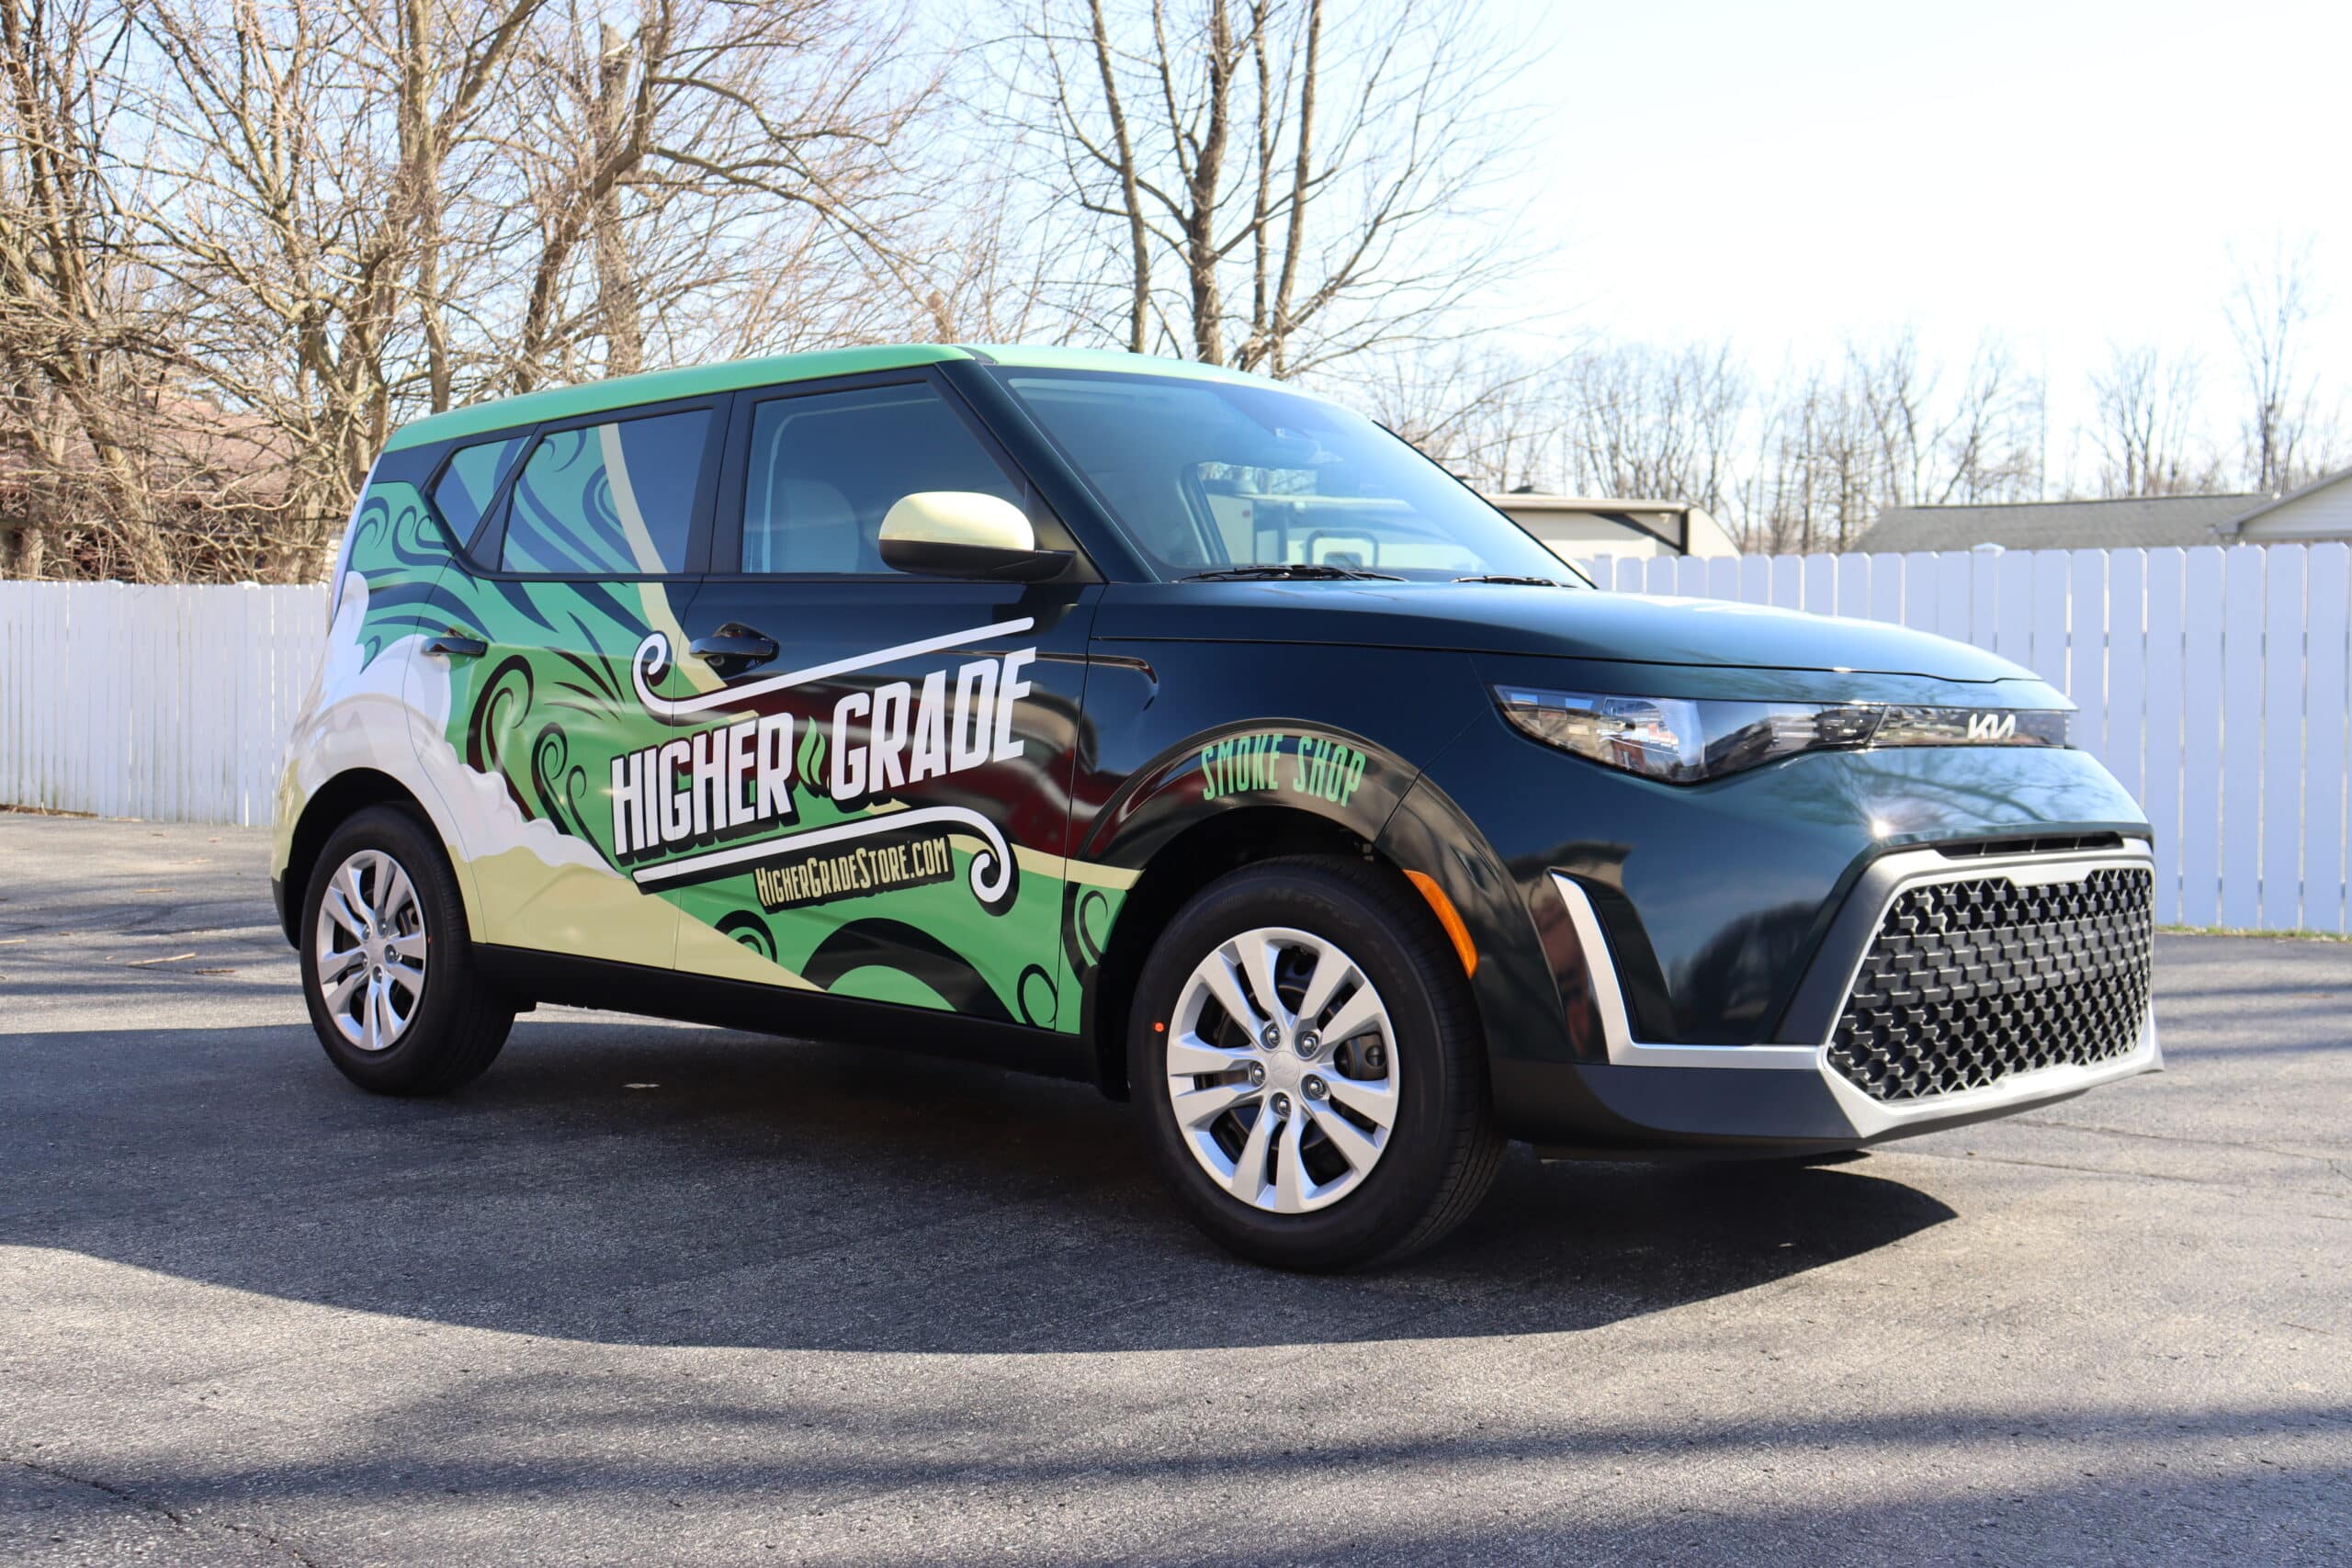 5 Top Tips For Small Business Vehicle Wrap Design